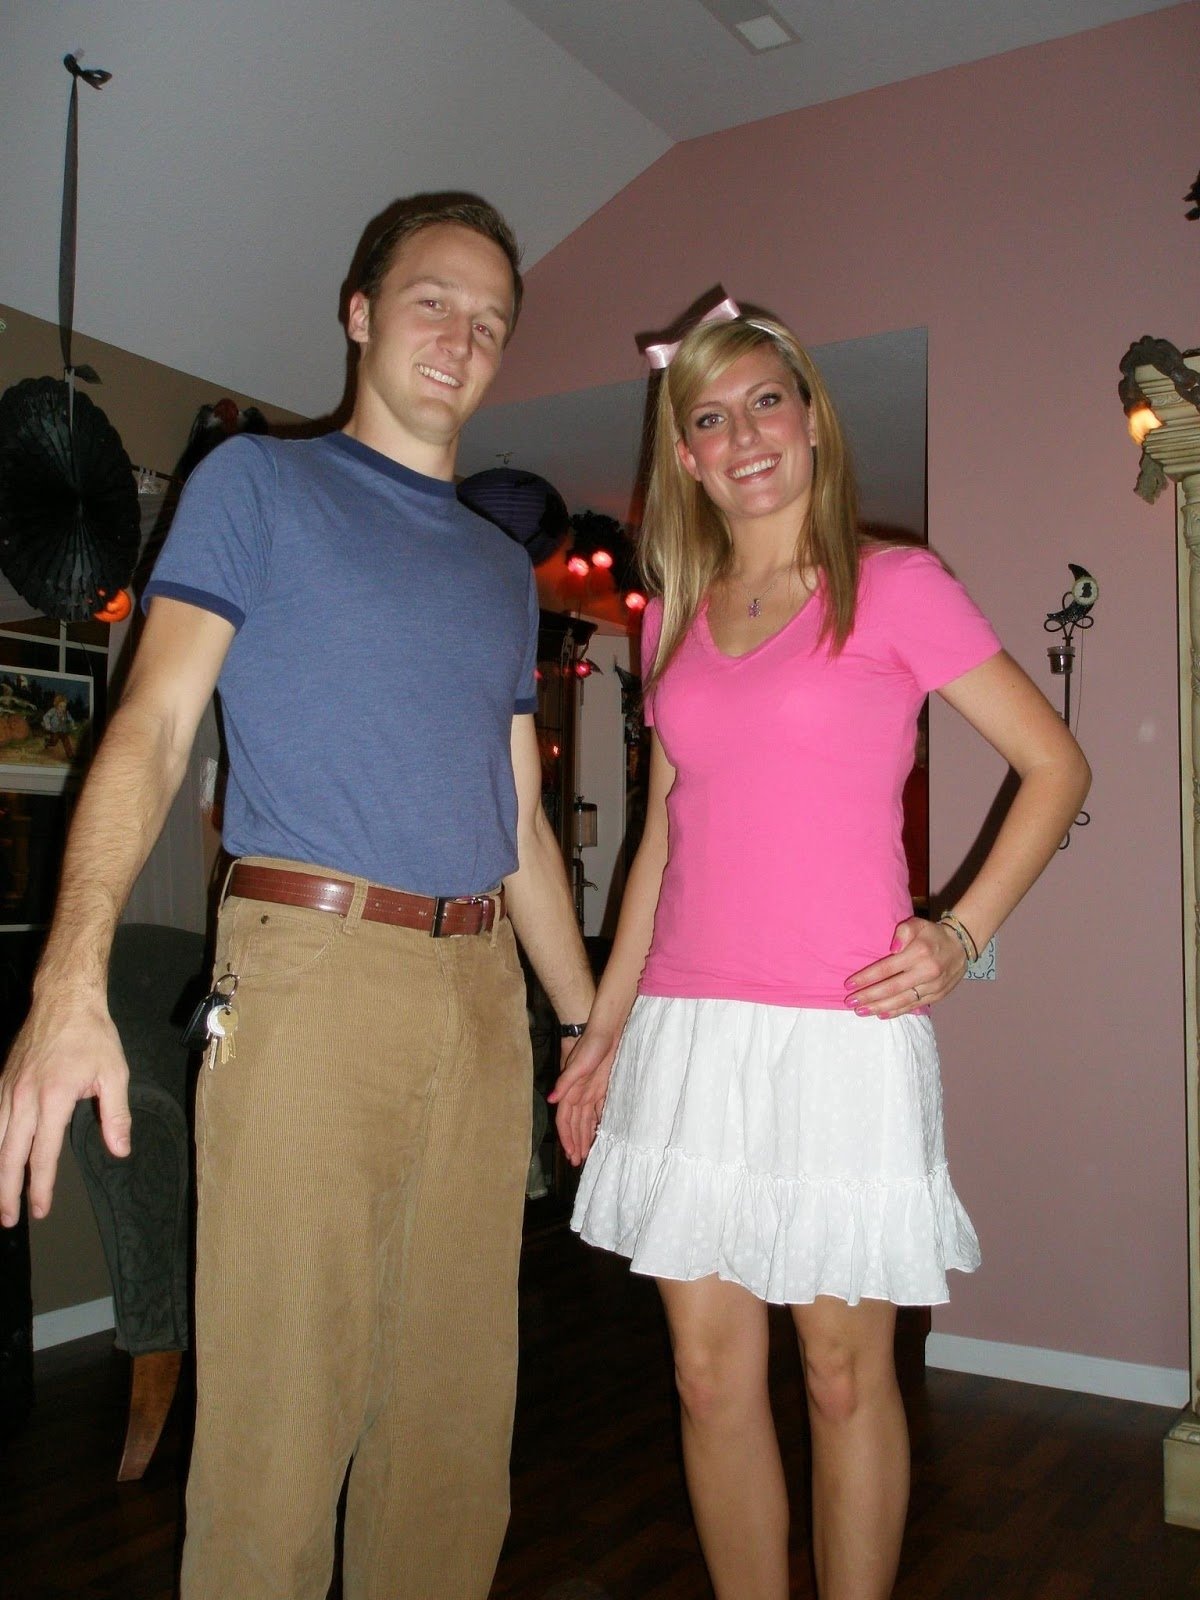 10 Famous Homemade Halloween Costume Ideas Couples 57 couples diy costumes valentine one halloween costumes for 2 2022